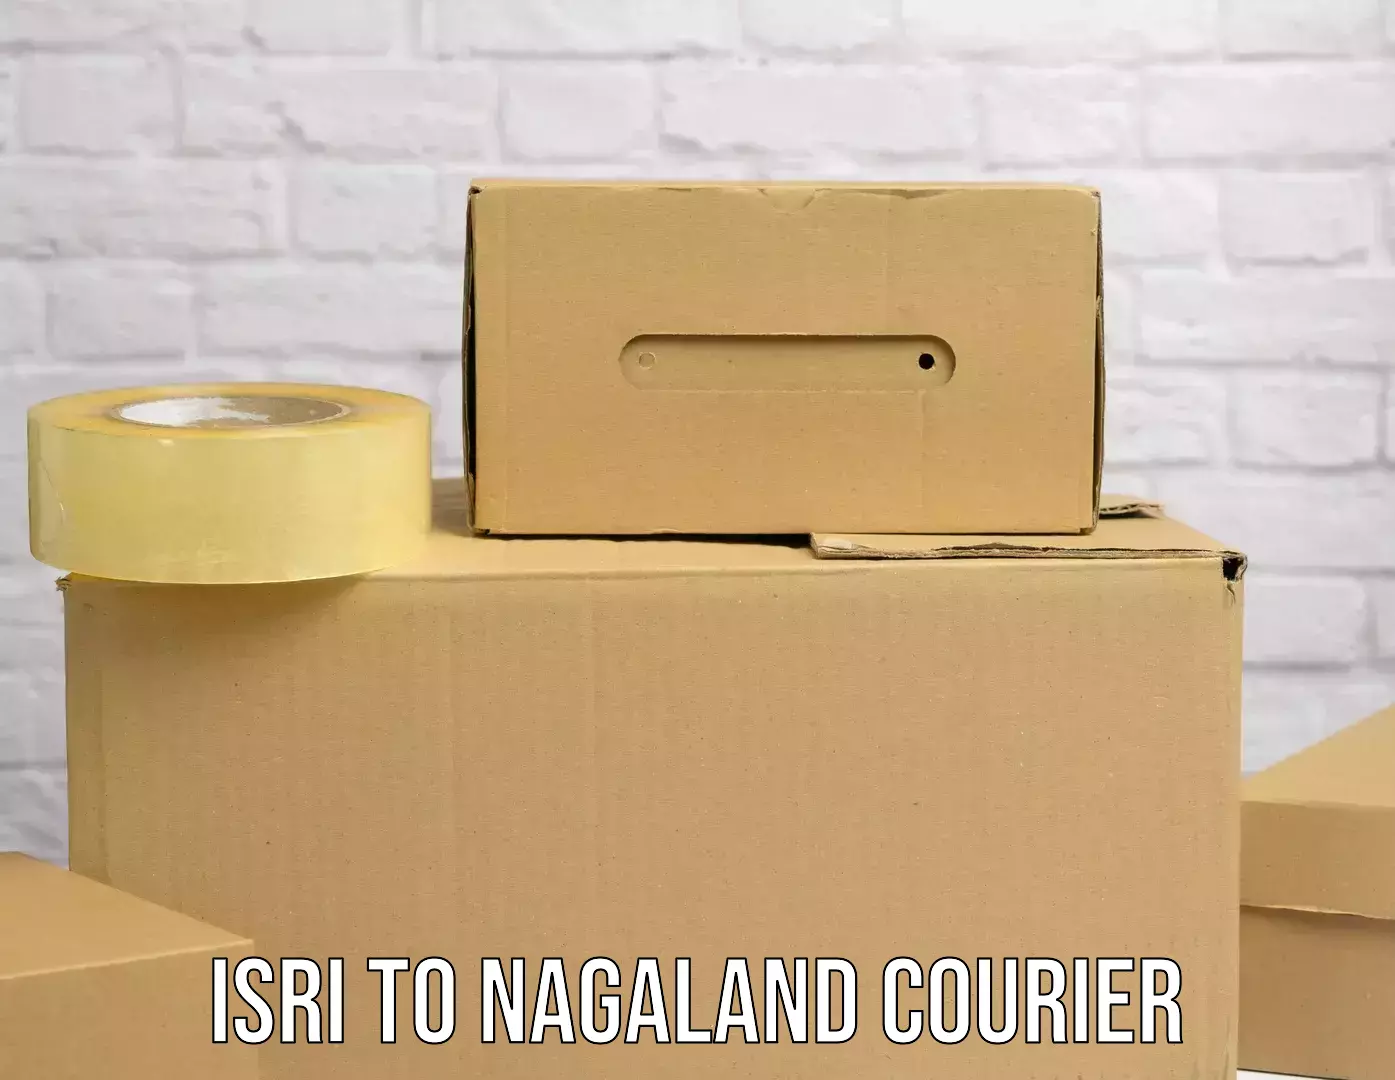 Automated parcel services Isri to Nagaland